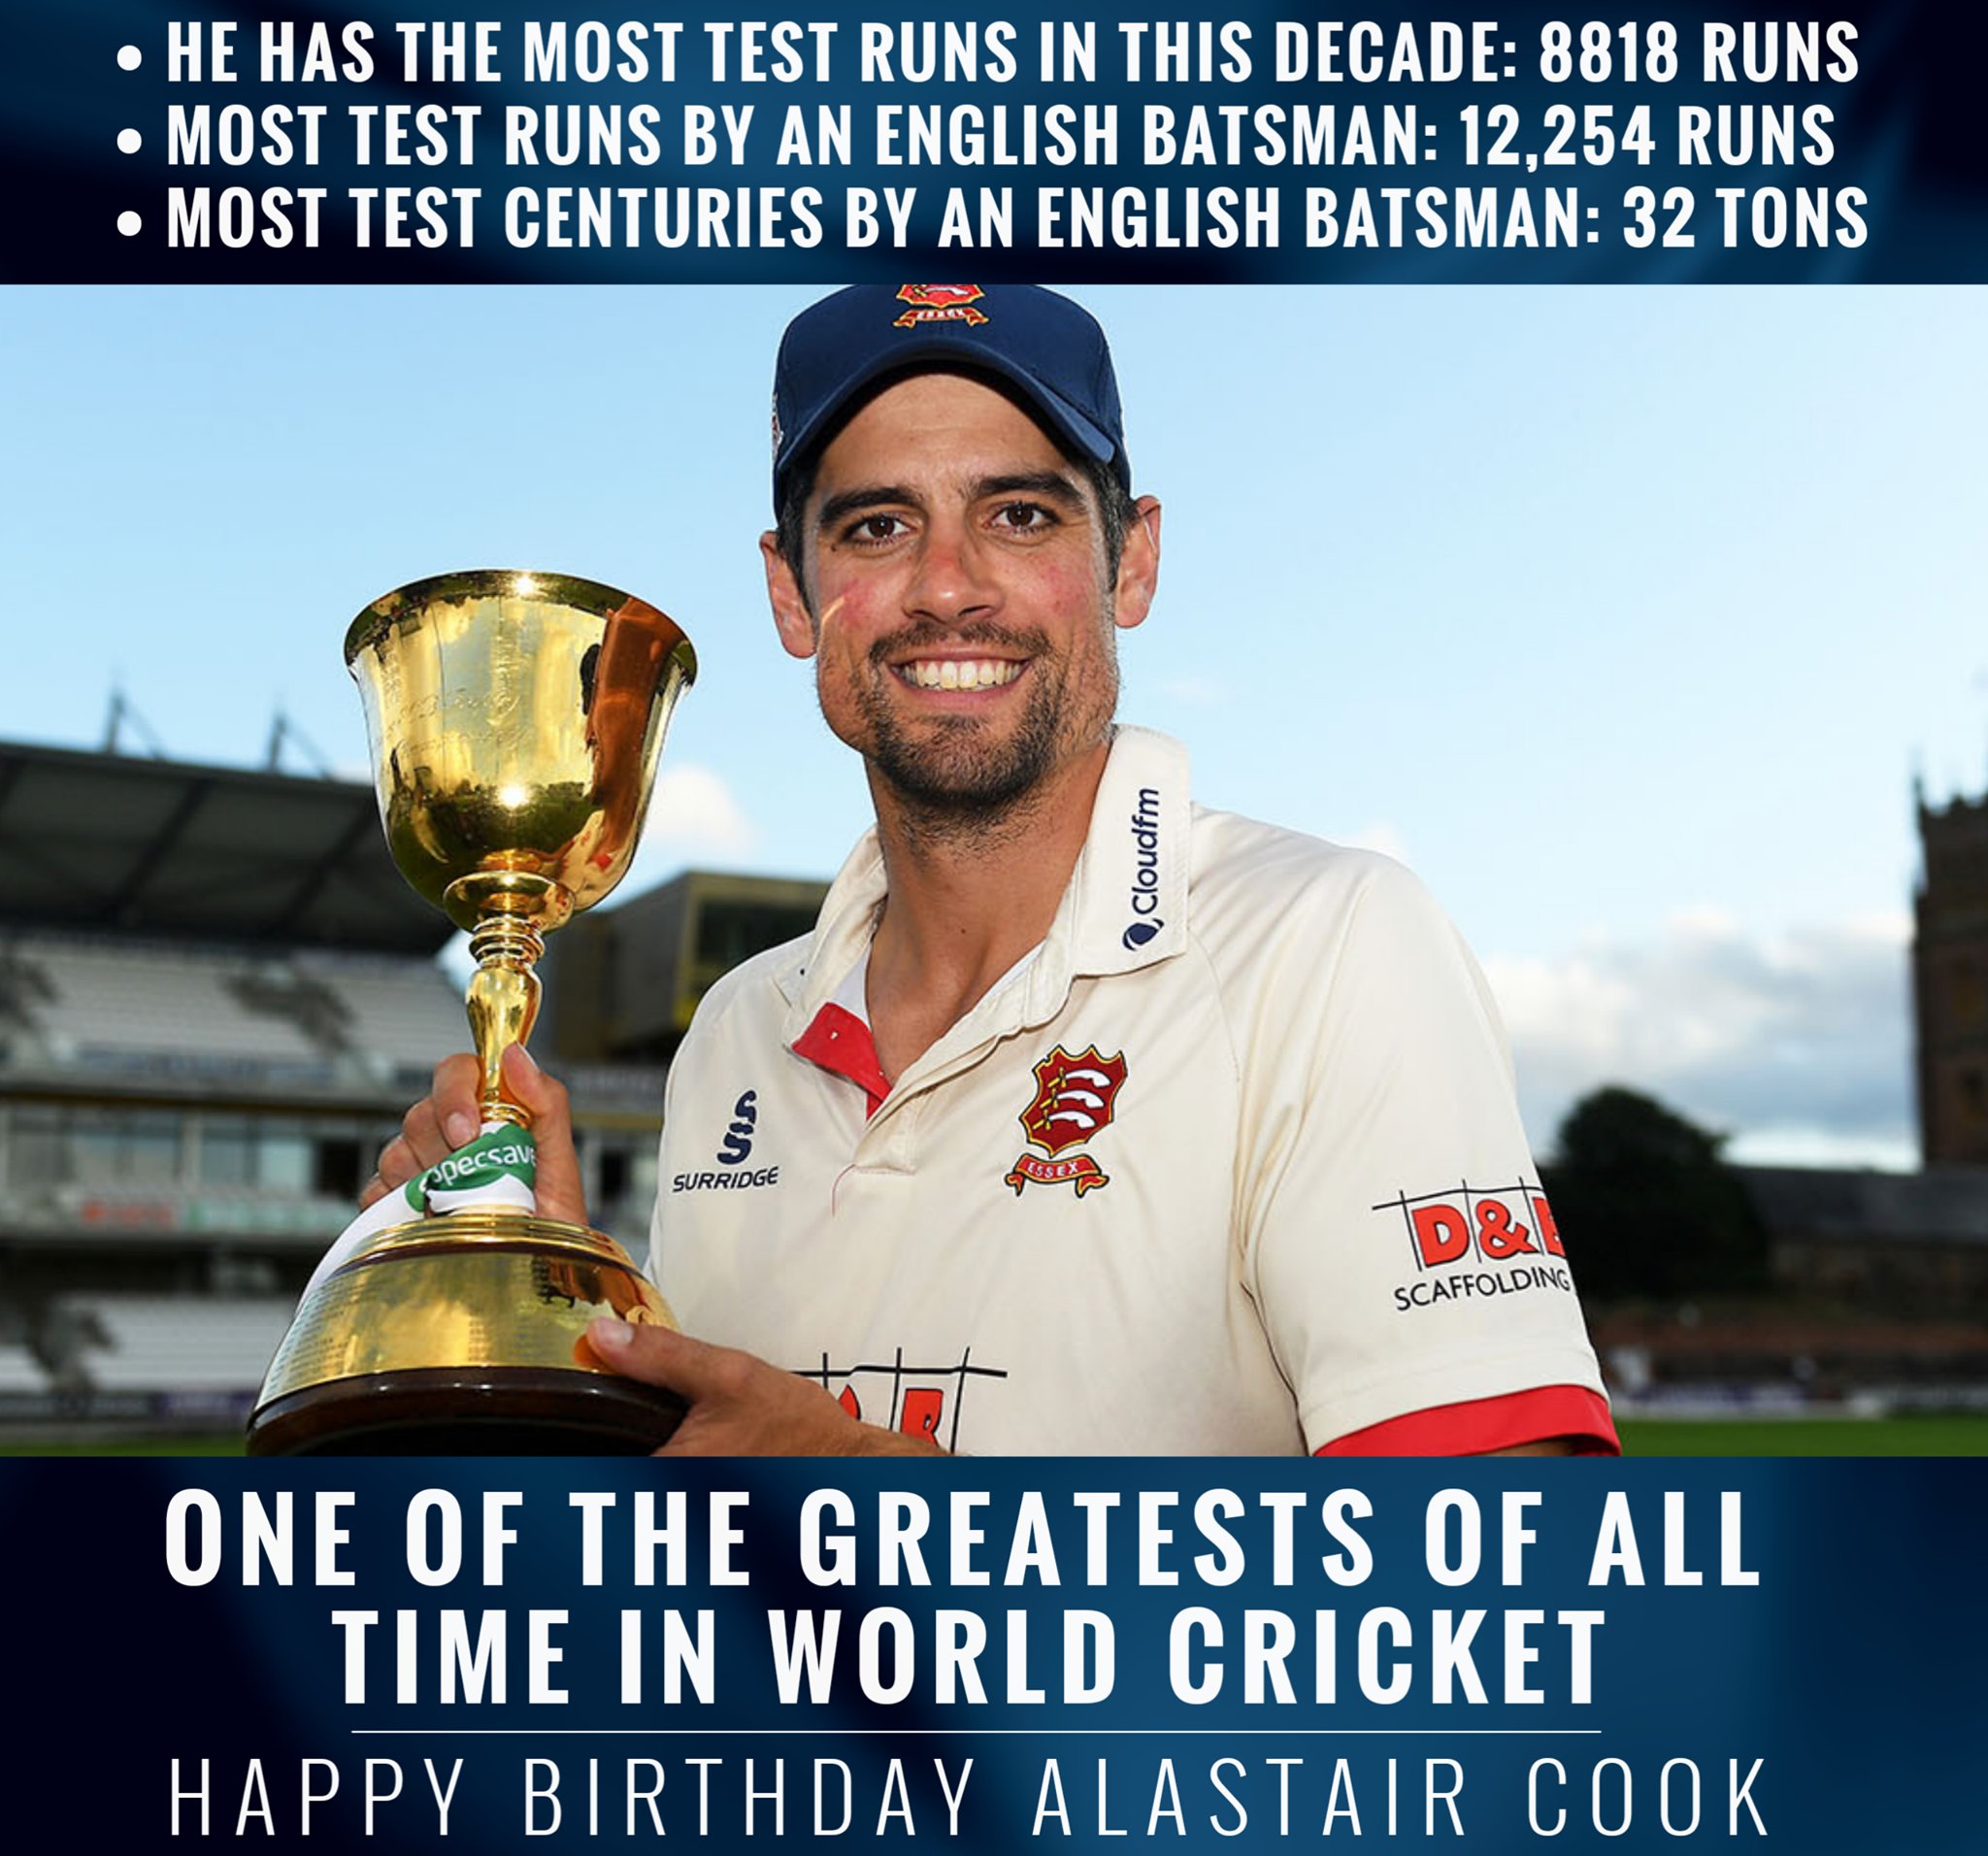 Sir Alastair Cook turns 35 today. Join us in wishing him a very happy birthday. 